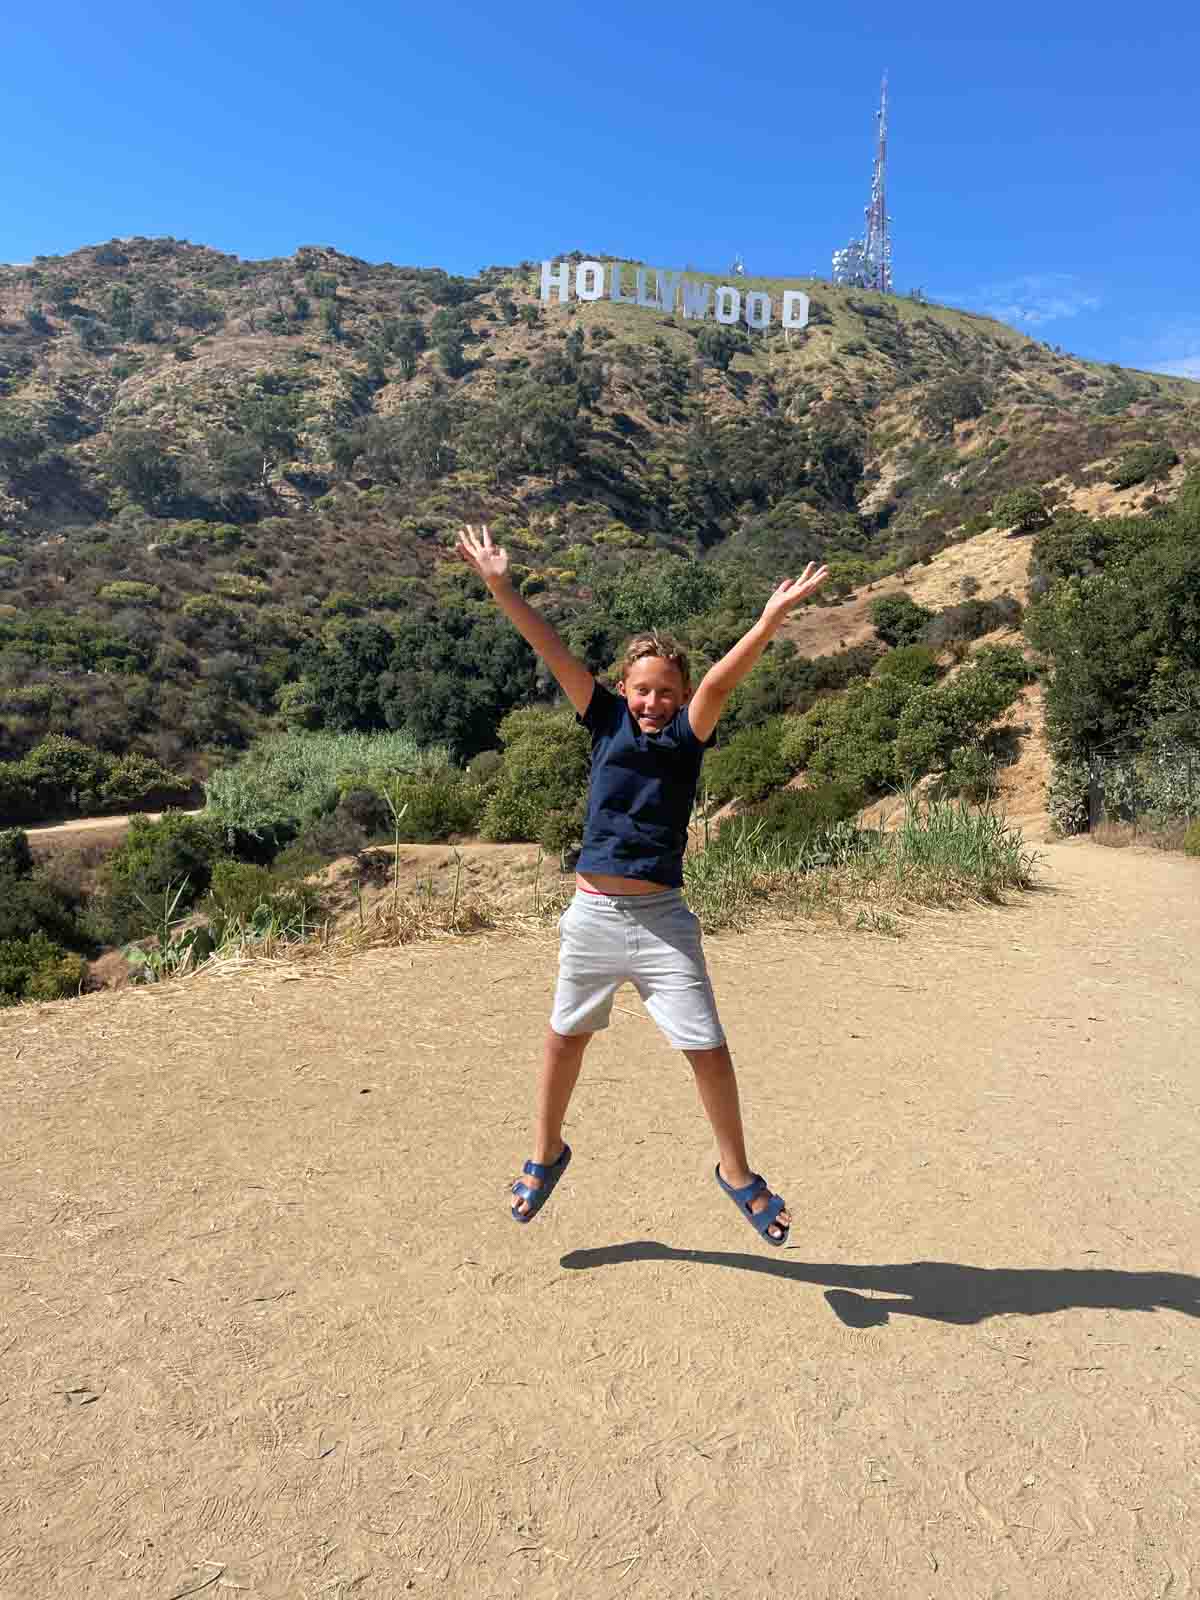 Boy jumping in front of the Hollywood sign.